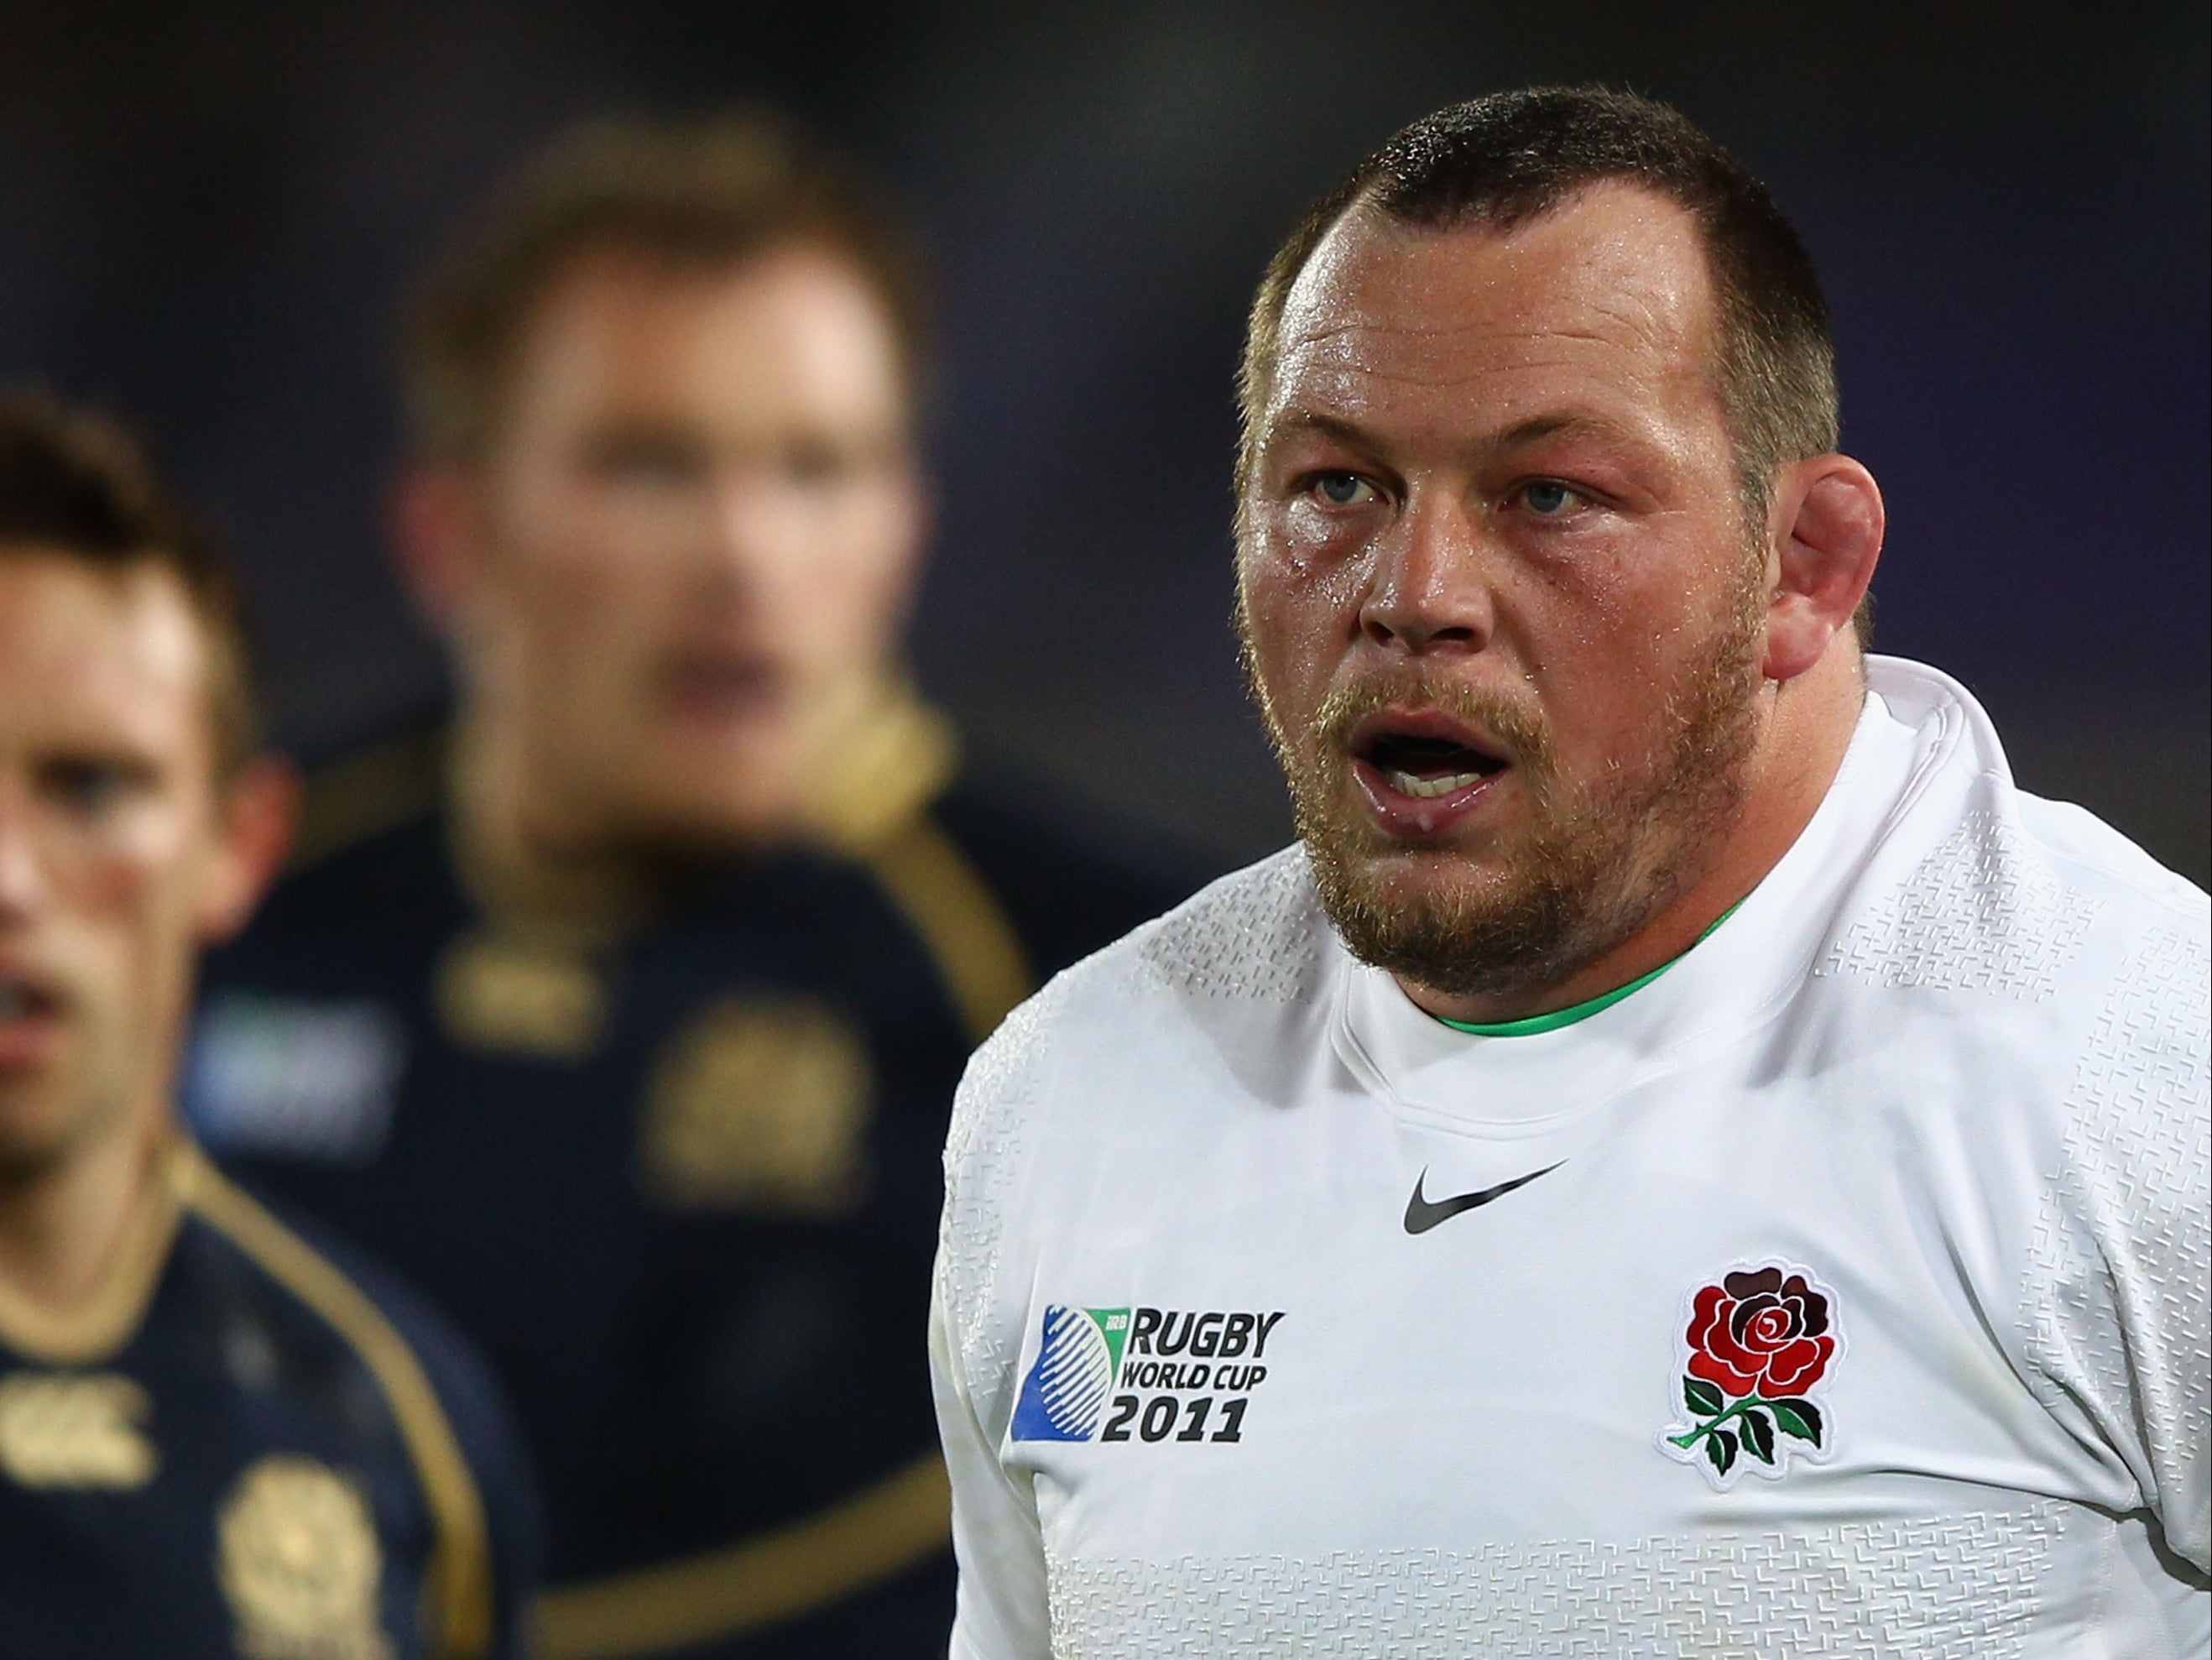 Former England prop Steve Thompson has been diagnosed with dementia